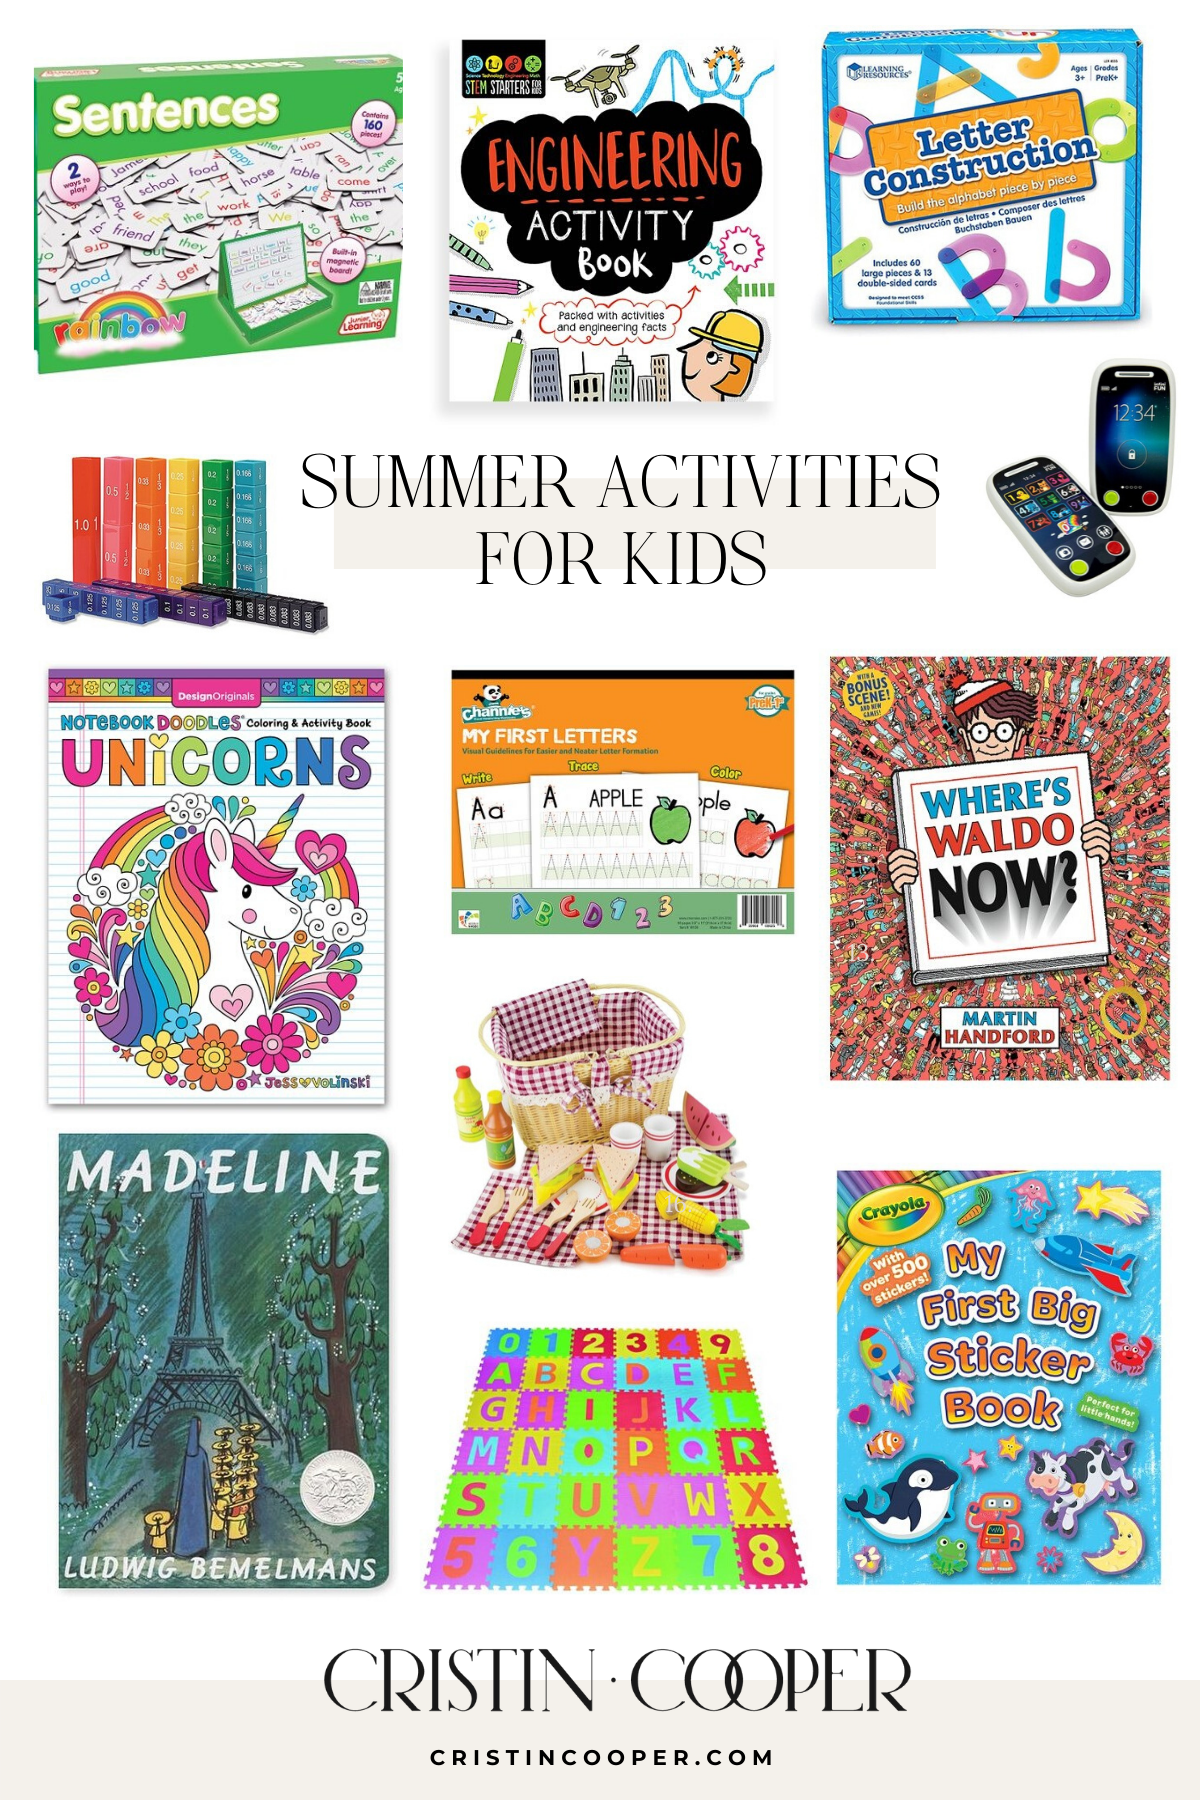 Zulily Finds for Kids. Summer Activities for Kids on Zulily.